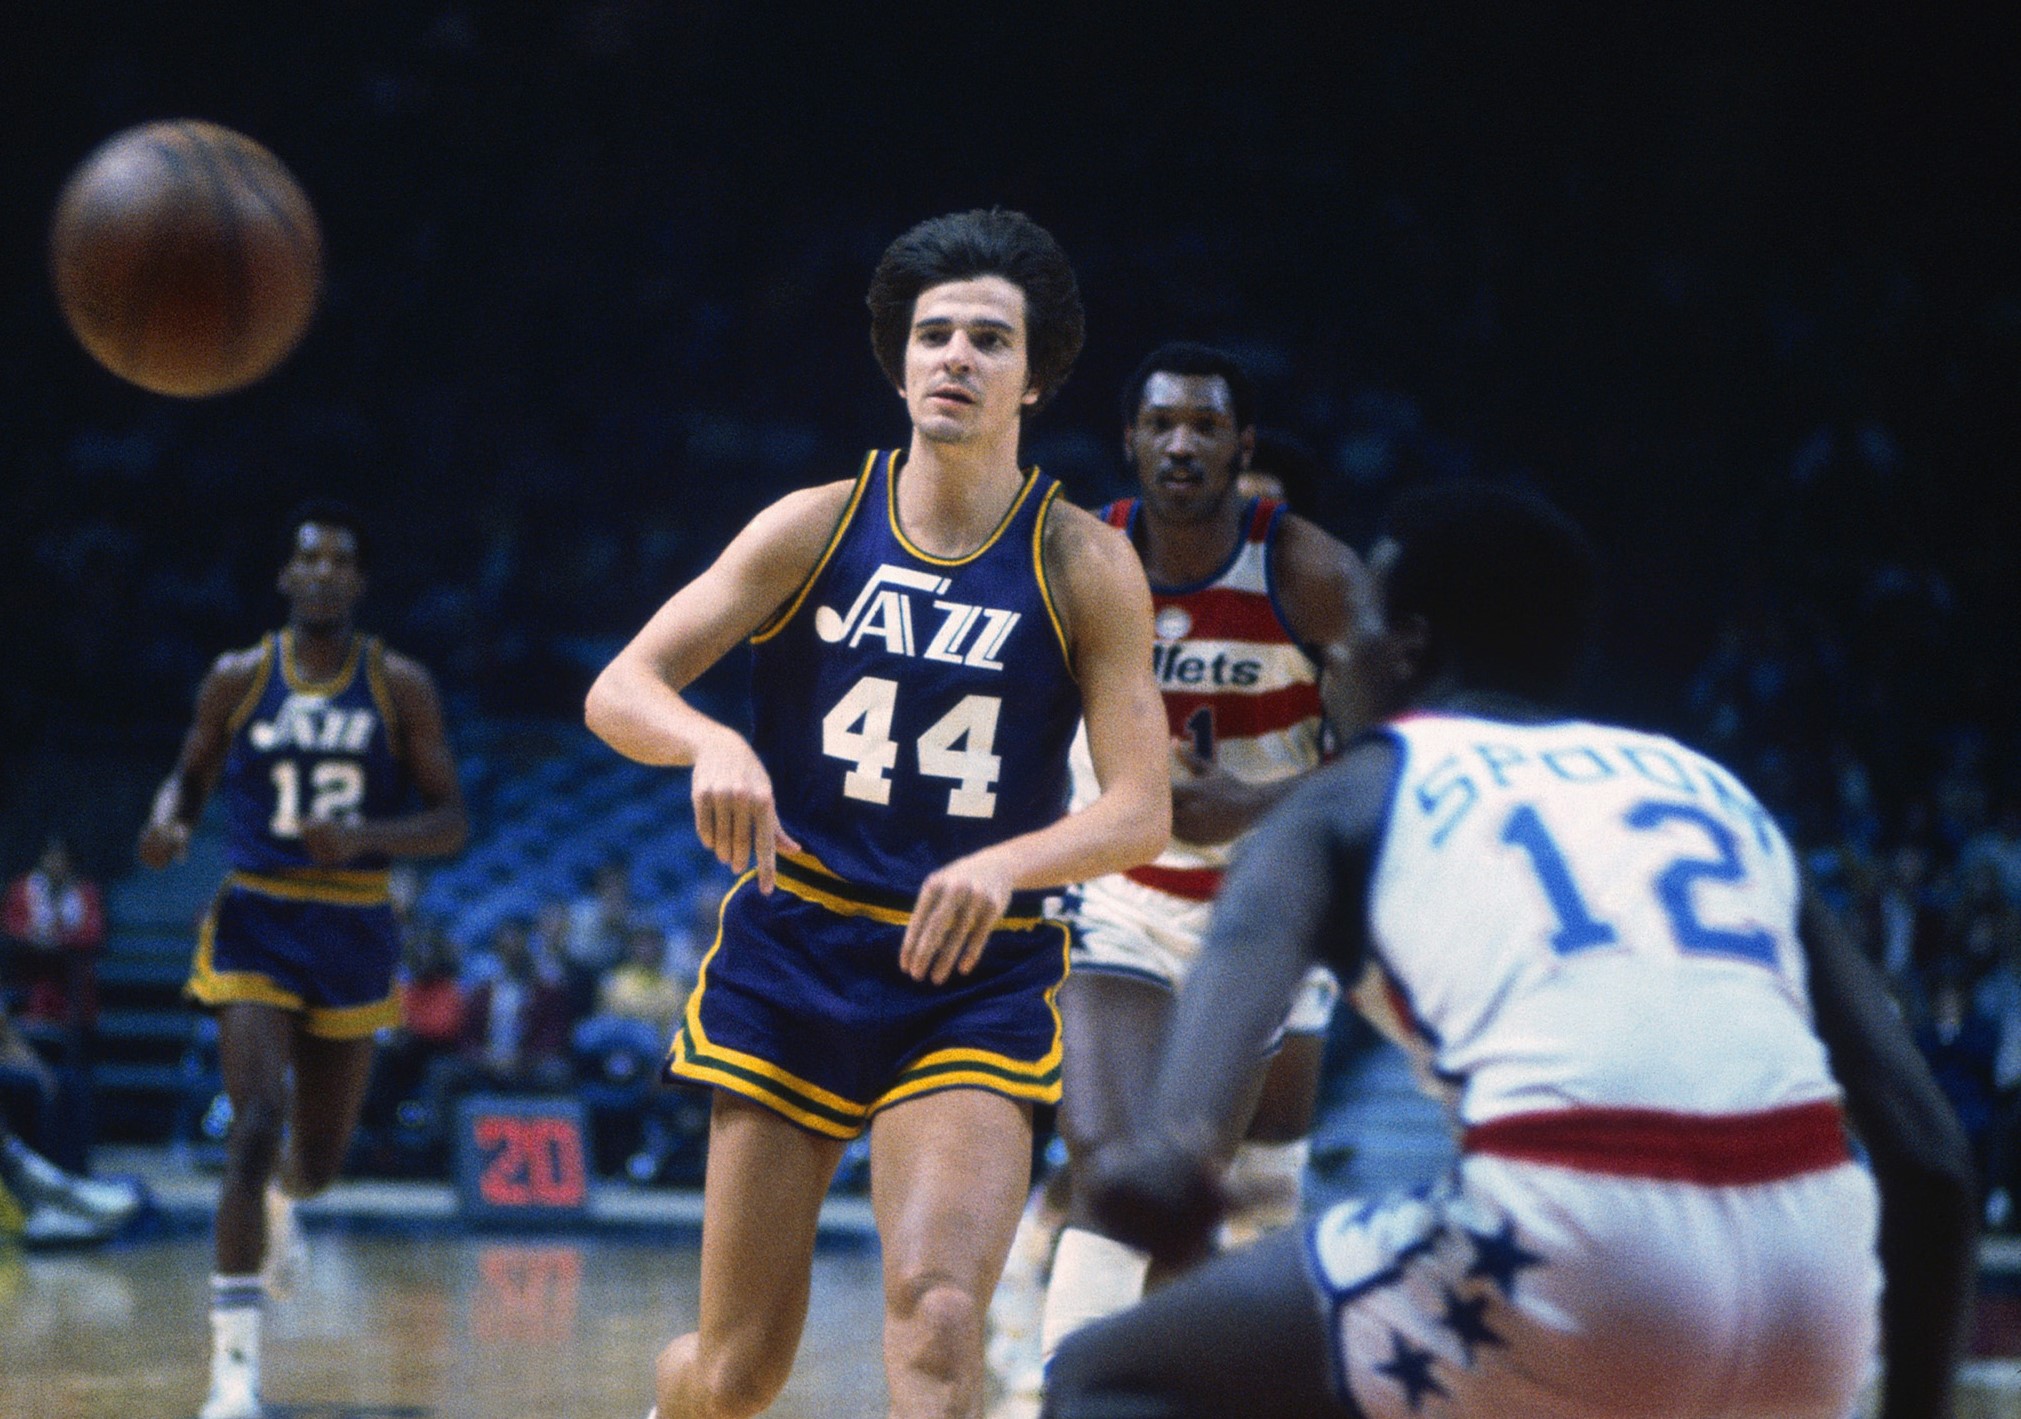 New Orleans Jazz guard Pete Maravich passes the ball near the basket